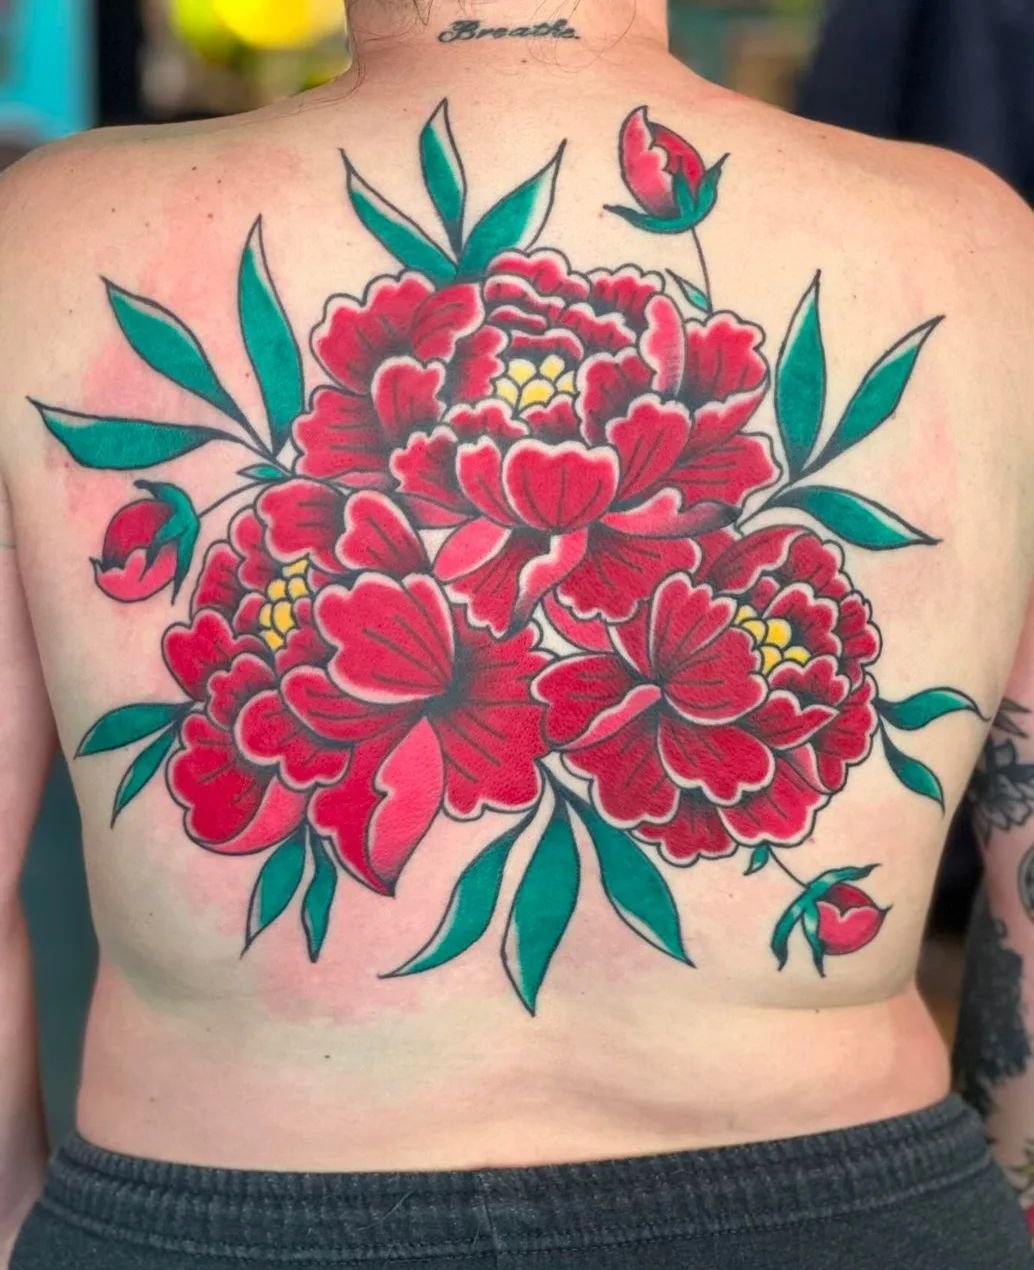 our gal @gabejoyner just wrapped up this biig ol' beautiful floral back piece 🌹🌹would you JUST LOOK AT IT?! 😍